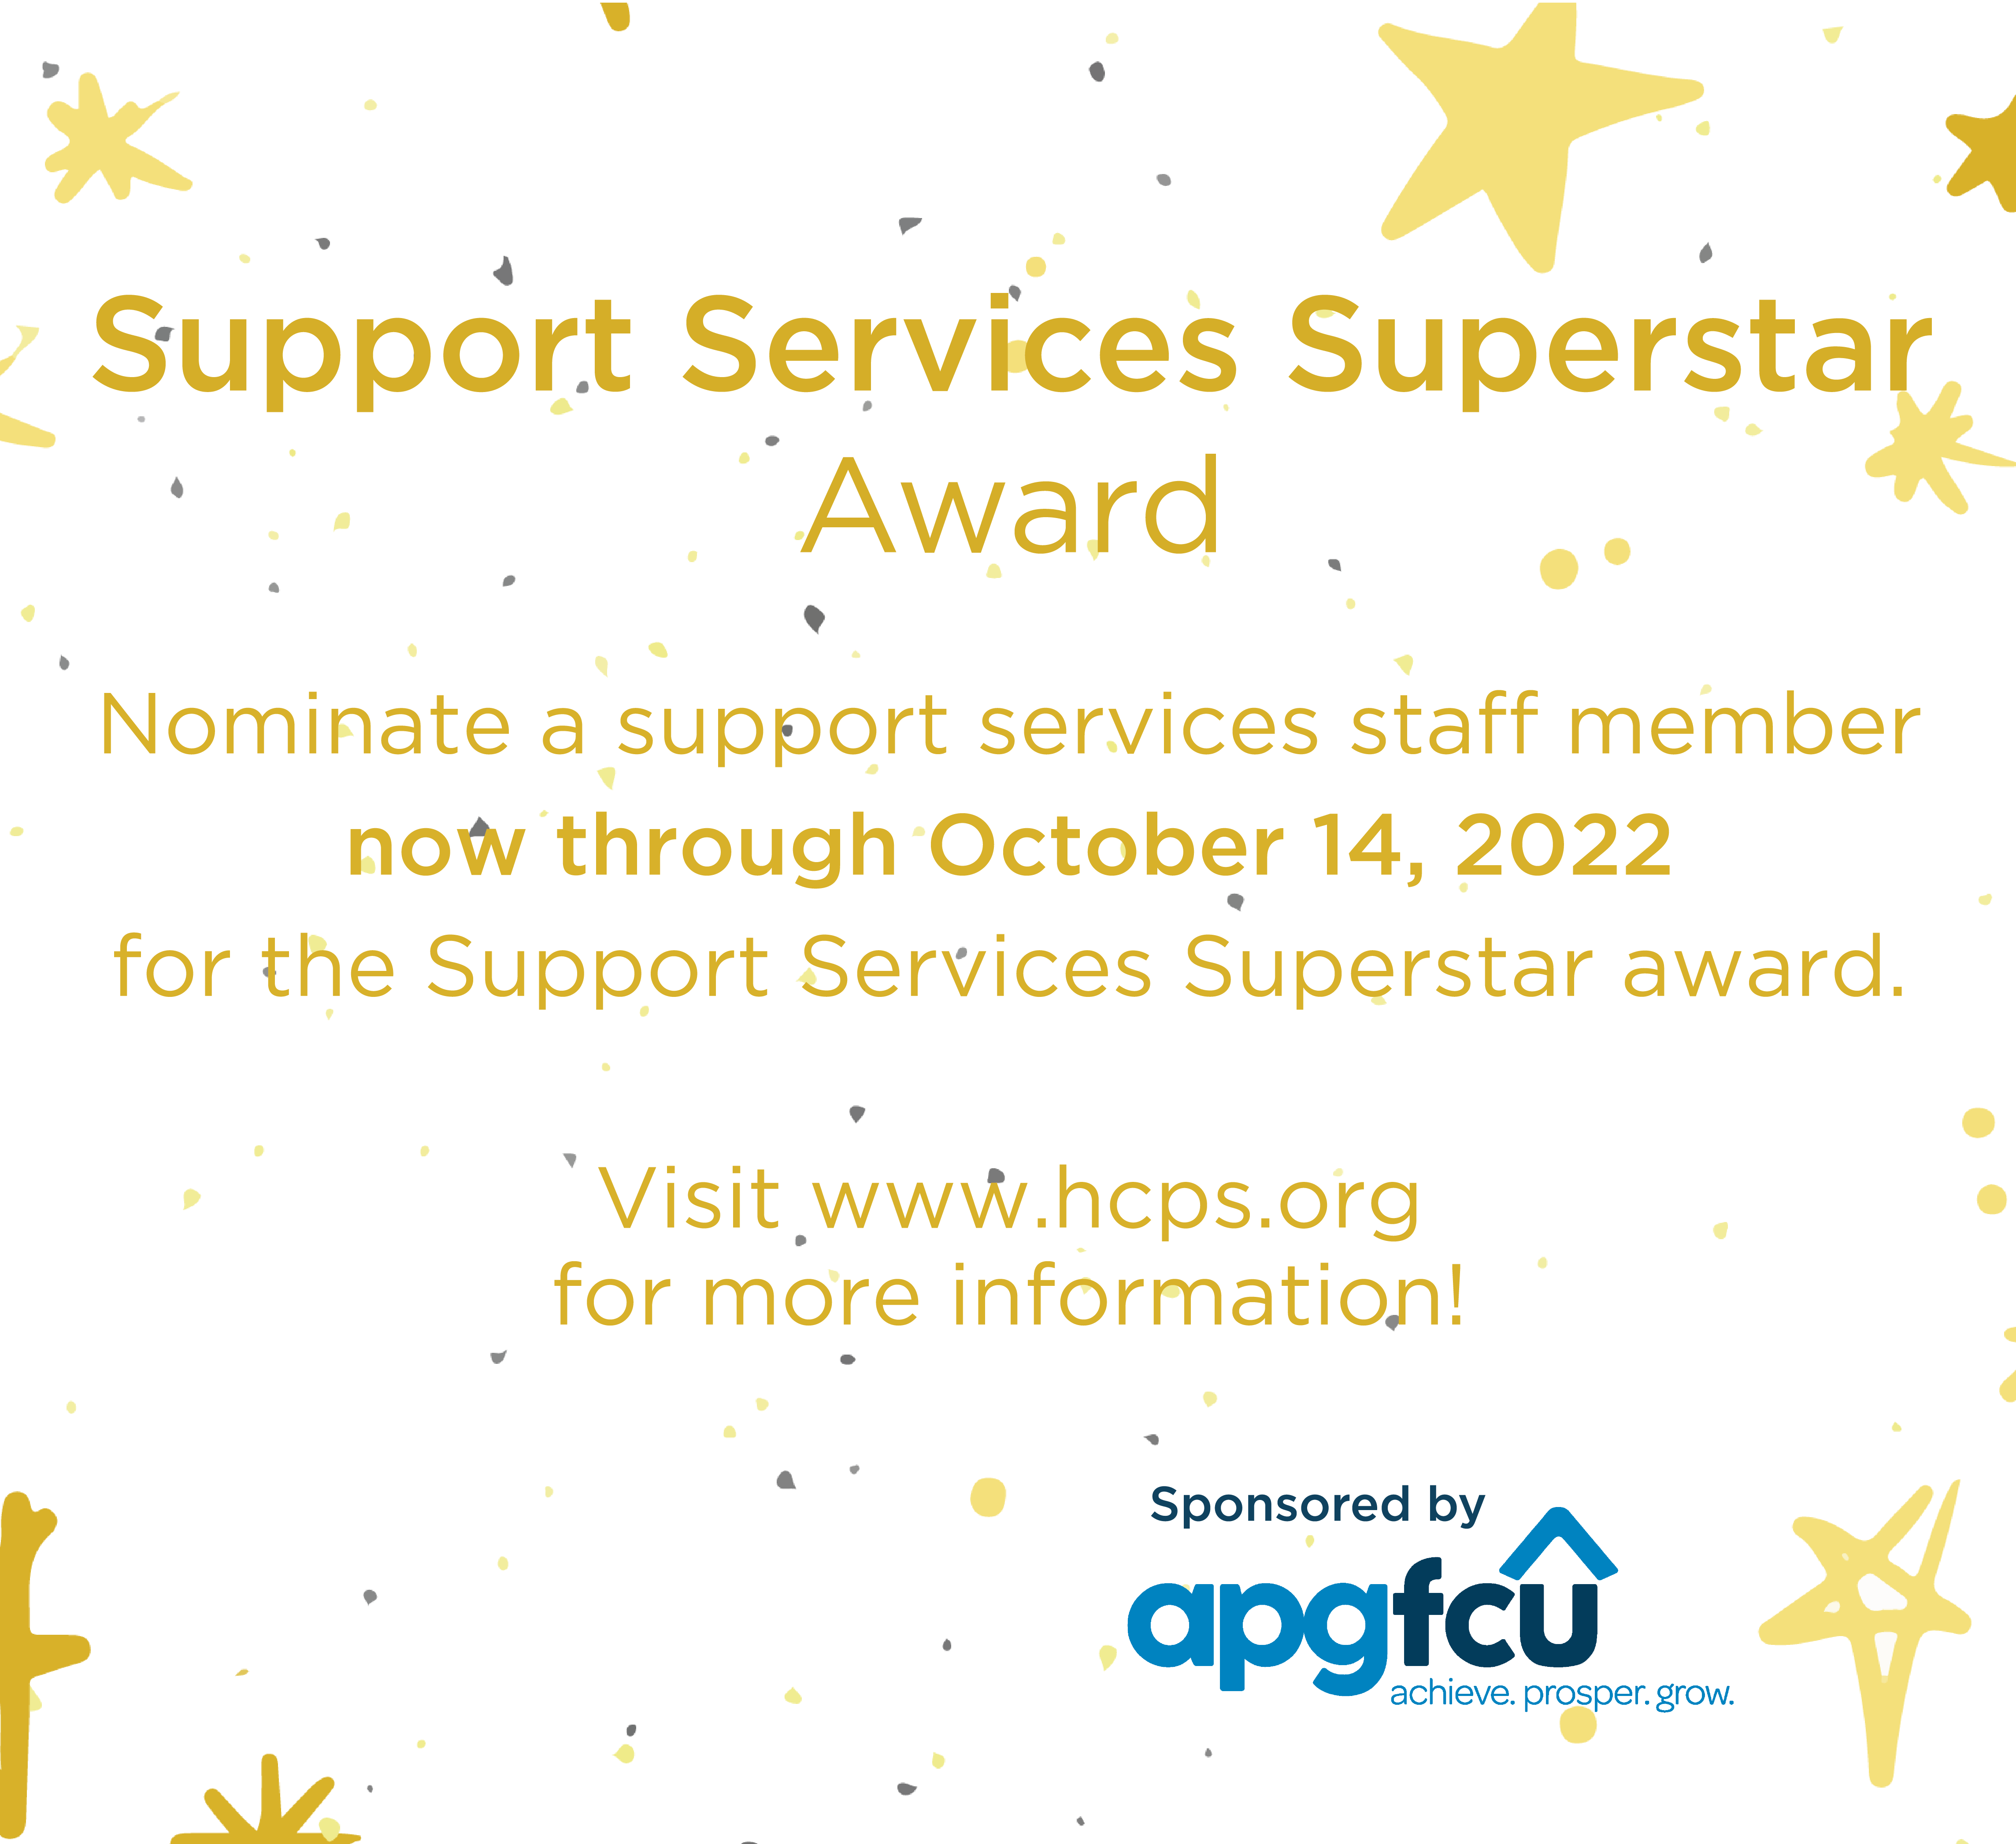 Nominate Now for the Support Services Superstar Award!